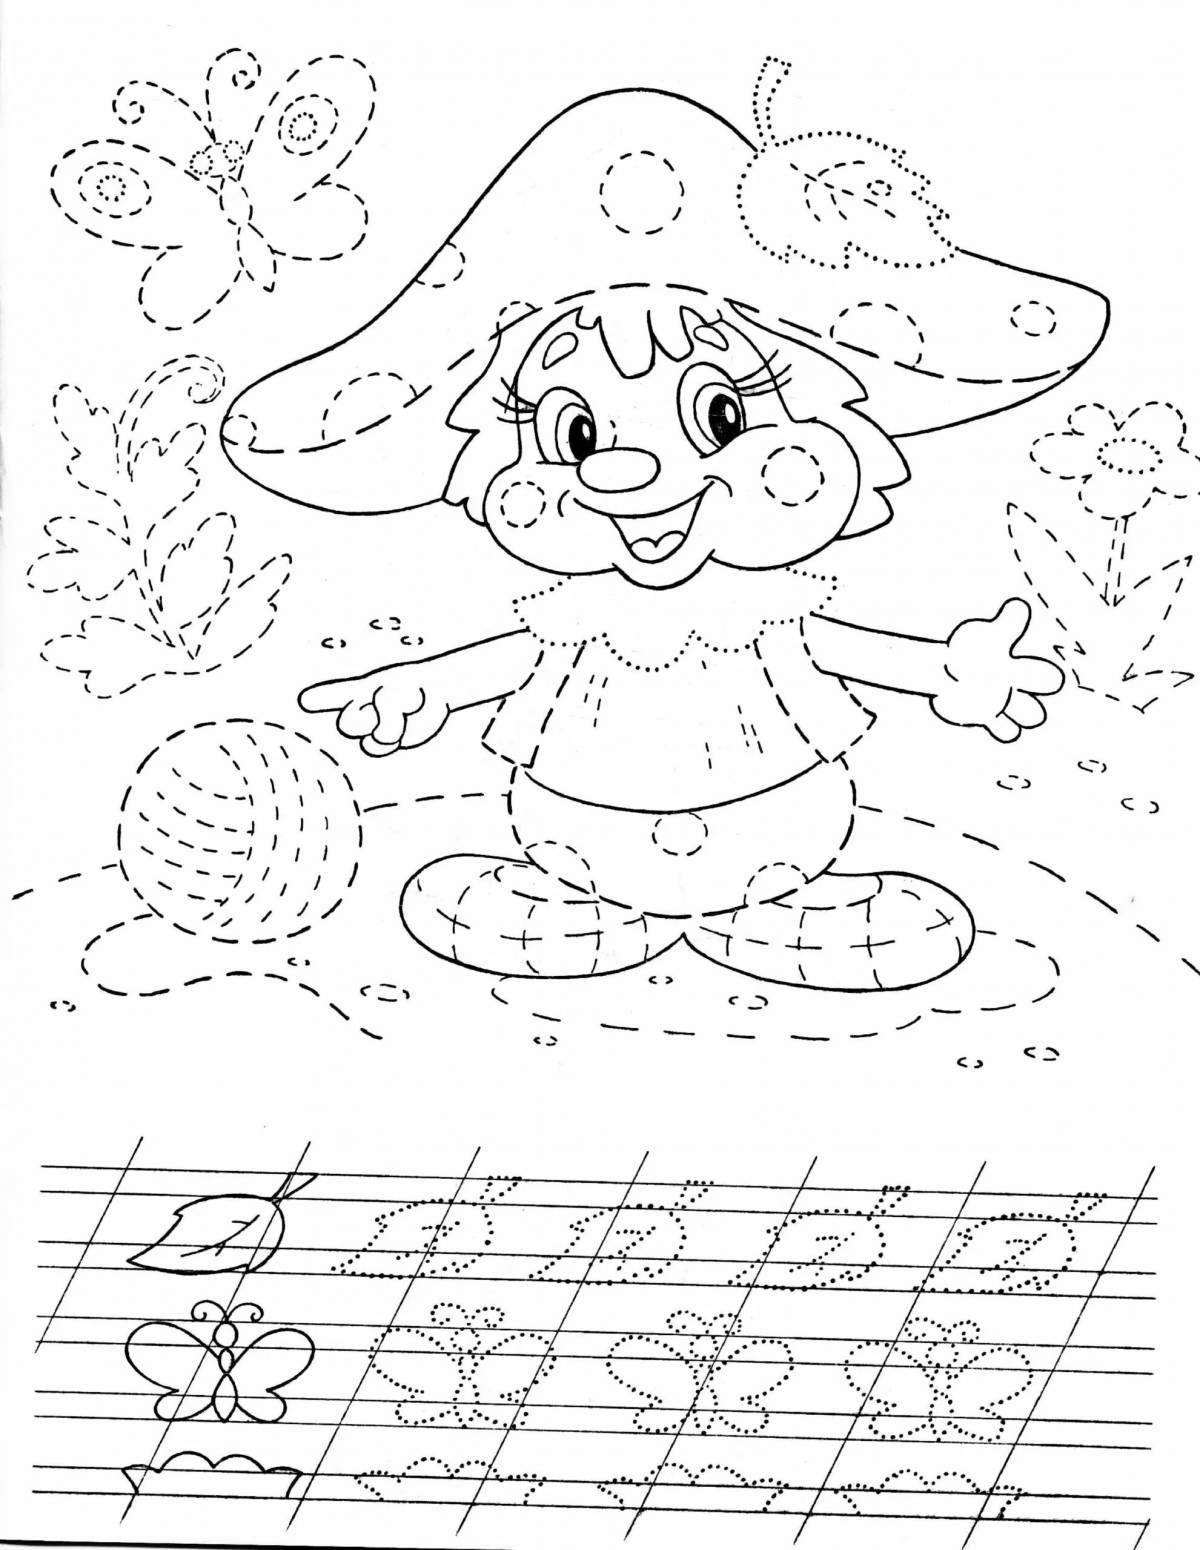 Recipe coloring page for 4-5 year olds